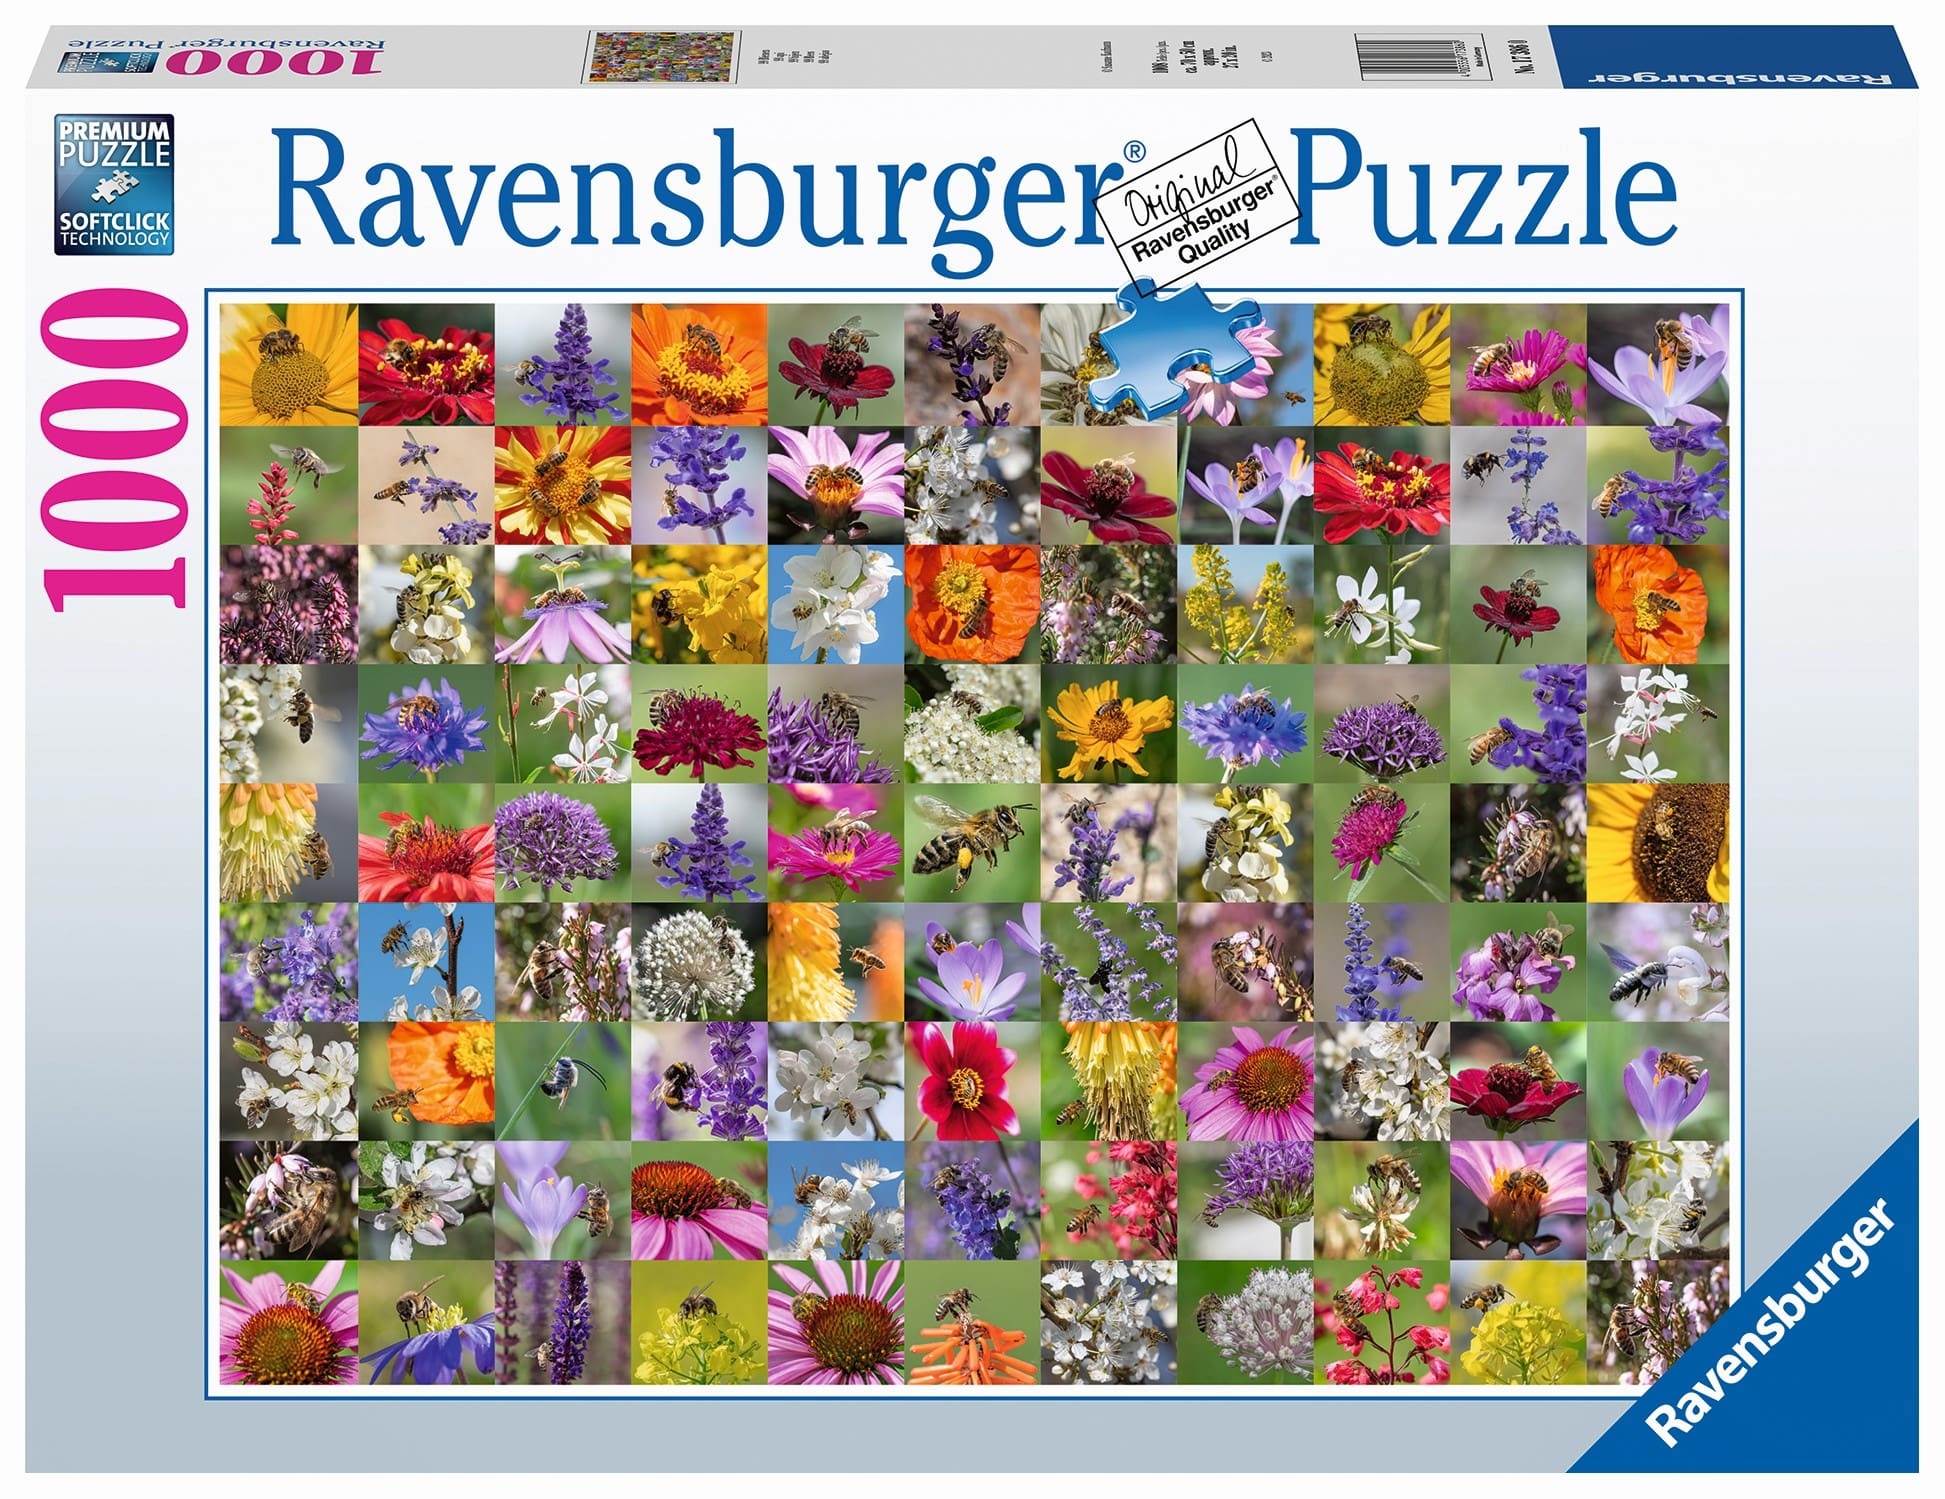 Ravensburger Disney Panorama Puzzle 1000 Pieces EXCELLENT PREOWNED!!